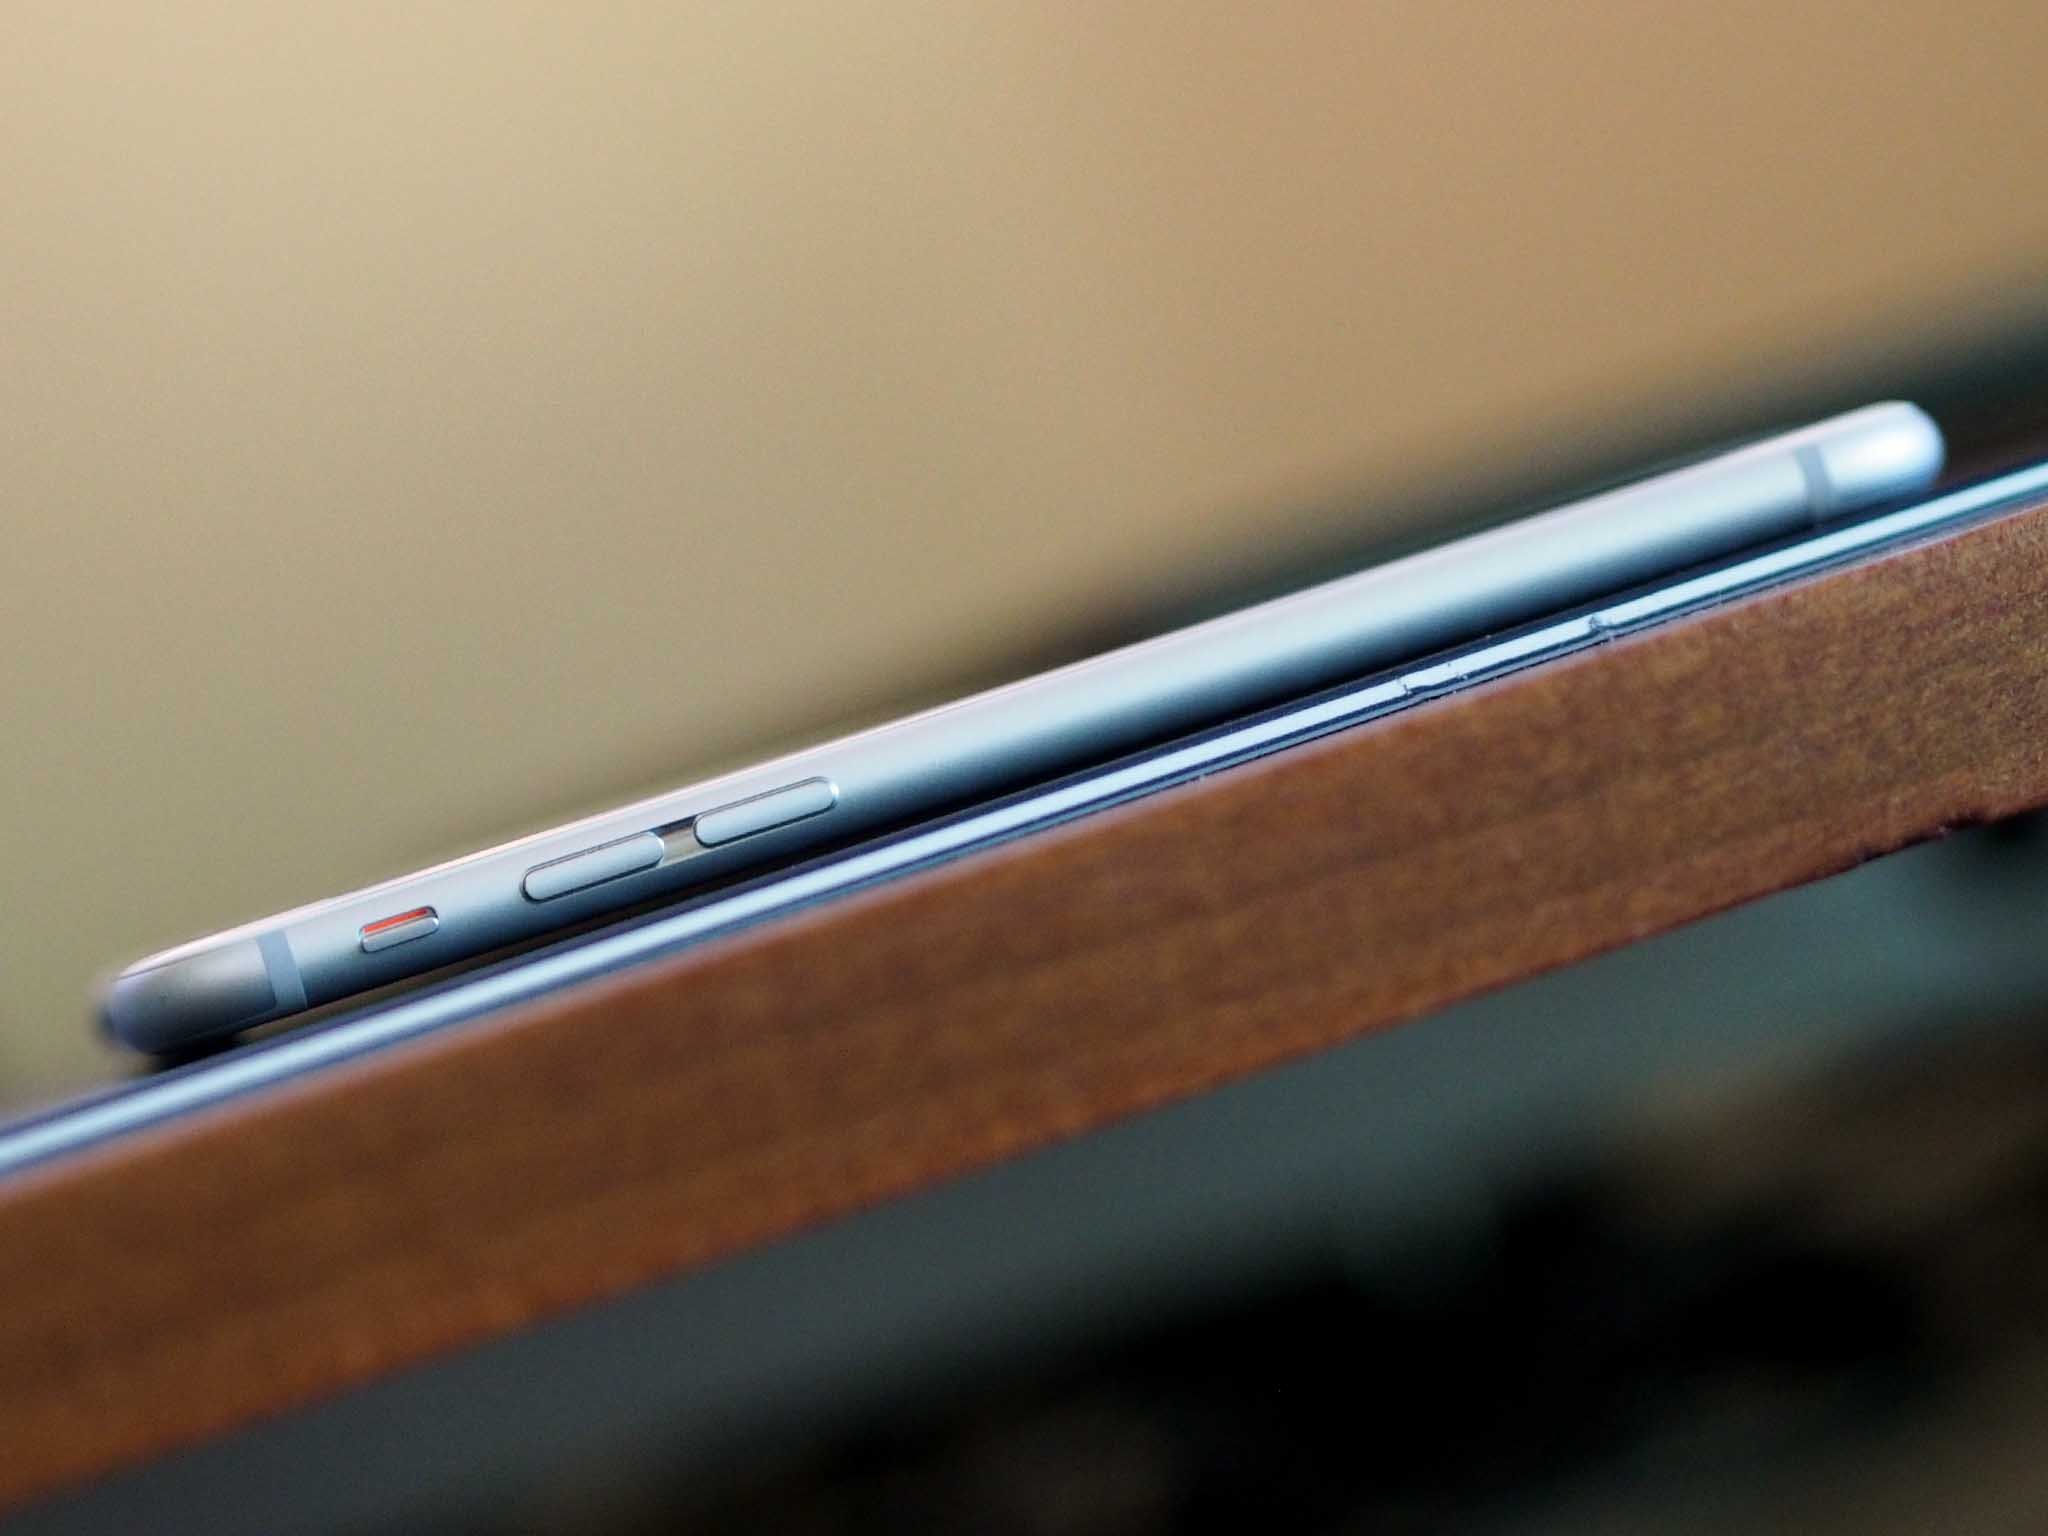 NSFW: Bendgate and the Internet echo chamber